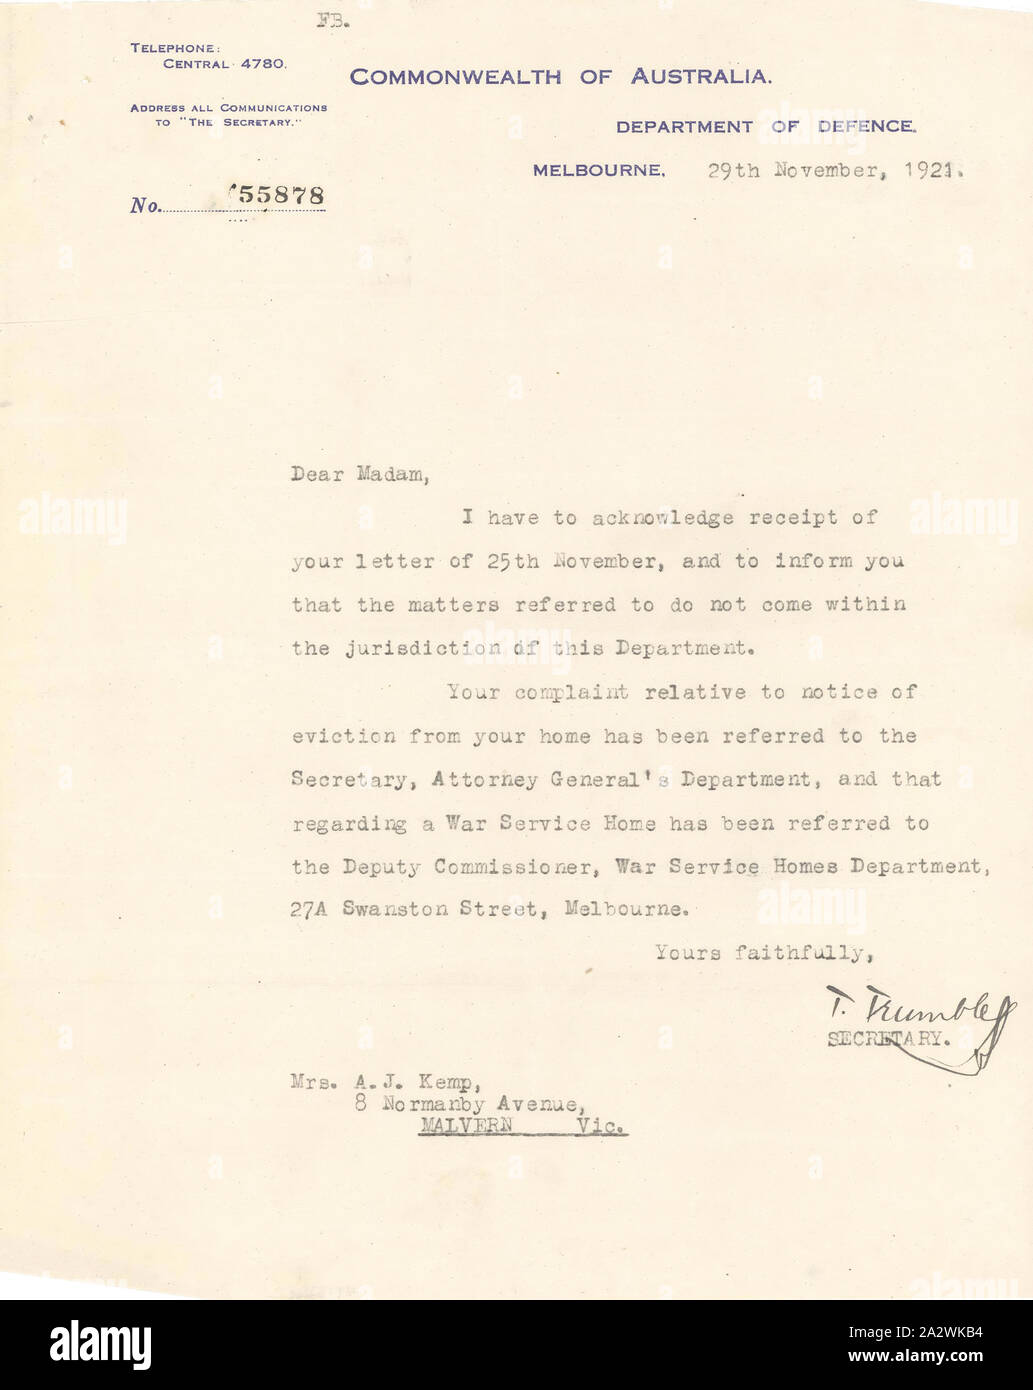 Letter - Department of Defence to Mrs A. J. Kemp, Eviction from Home, 29 Nov 1921, Letter to Annie Kemp, who was widowed during World War I, relating to her complaint about a notice of eviction from her home at 8 Normanby Ave, Malvern. The letter notes that her complaint has been referred to the Attorney General's Department, and that regarding a War Service home has been referred to the War Service Homes Department. Annie had two children to support and was struggling Stock Photo